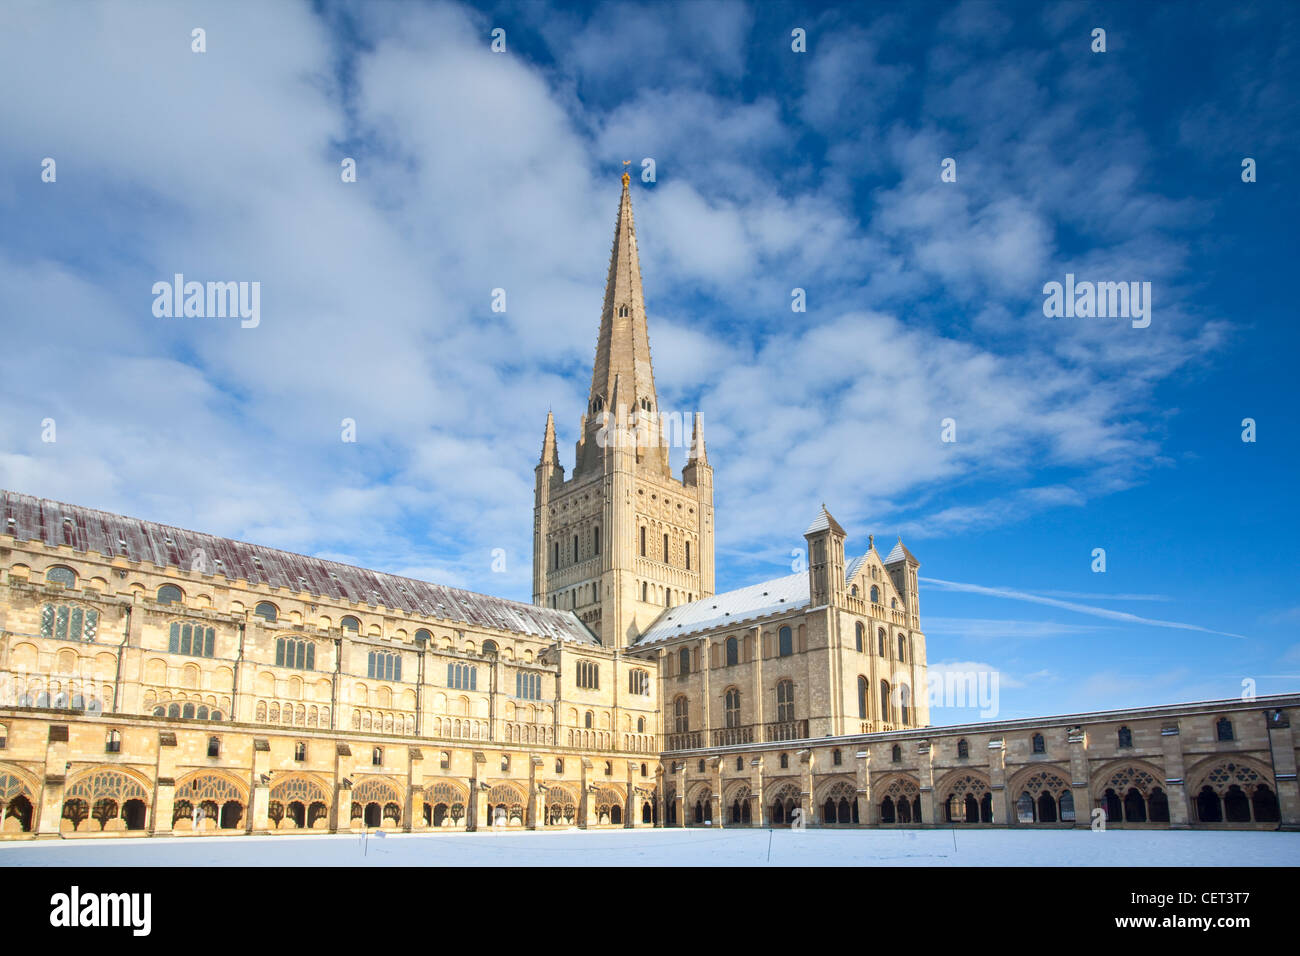 Snow covering the Labyrinth in the Cloister Garth of Norwich Cathedral. Stock Photo